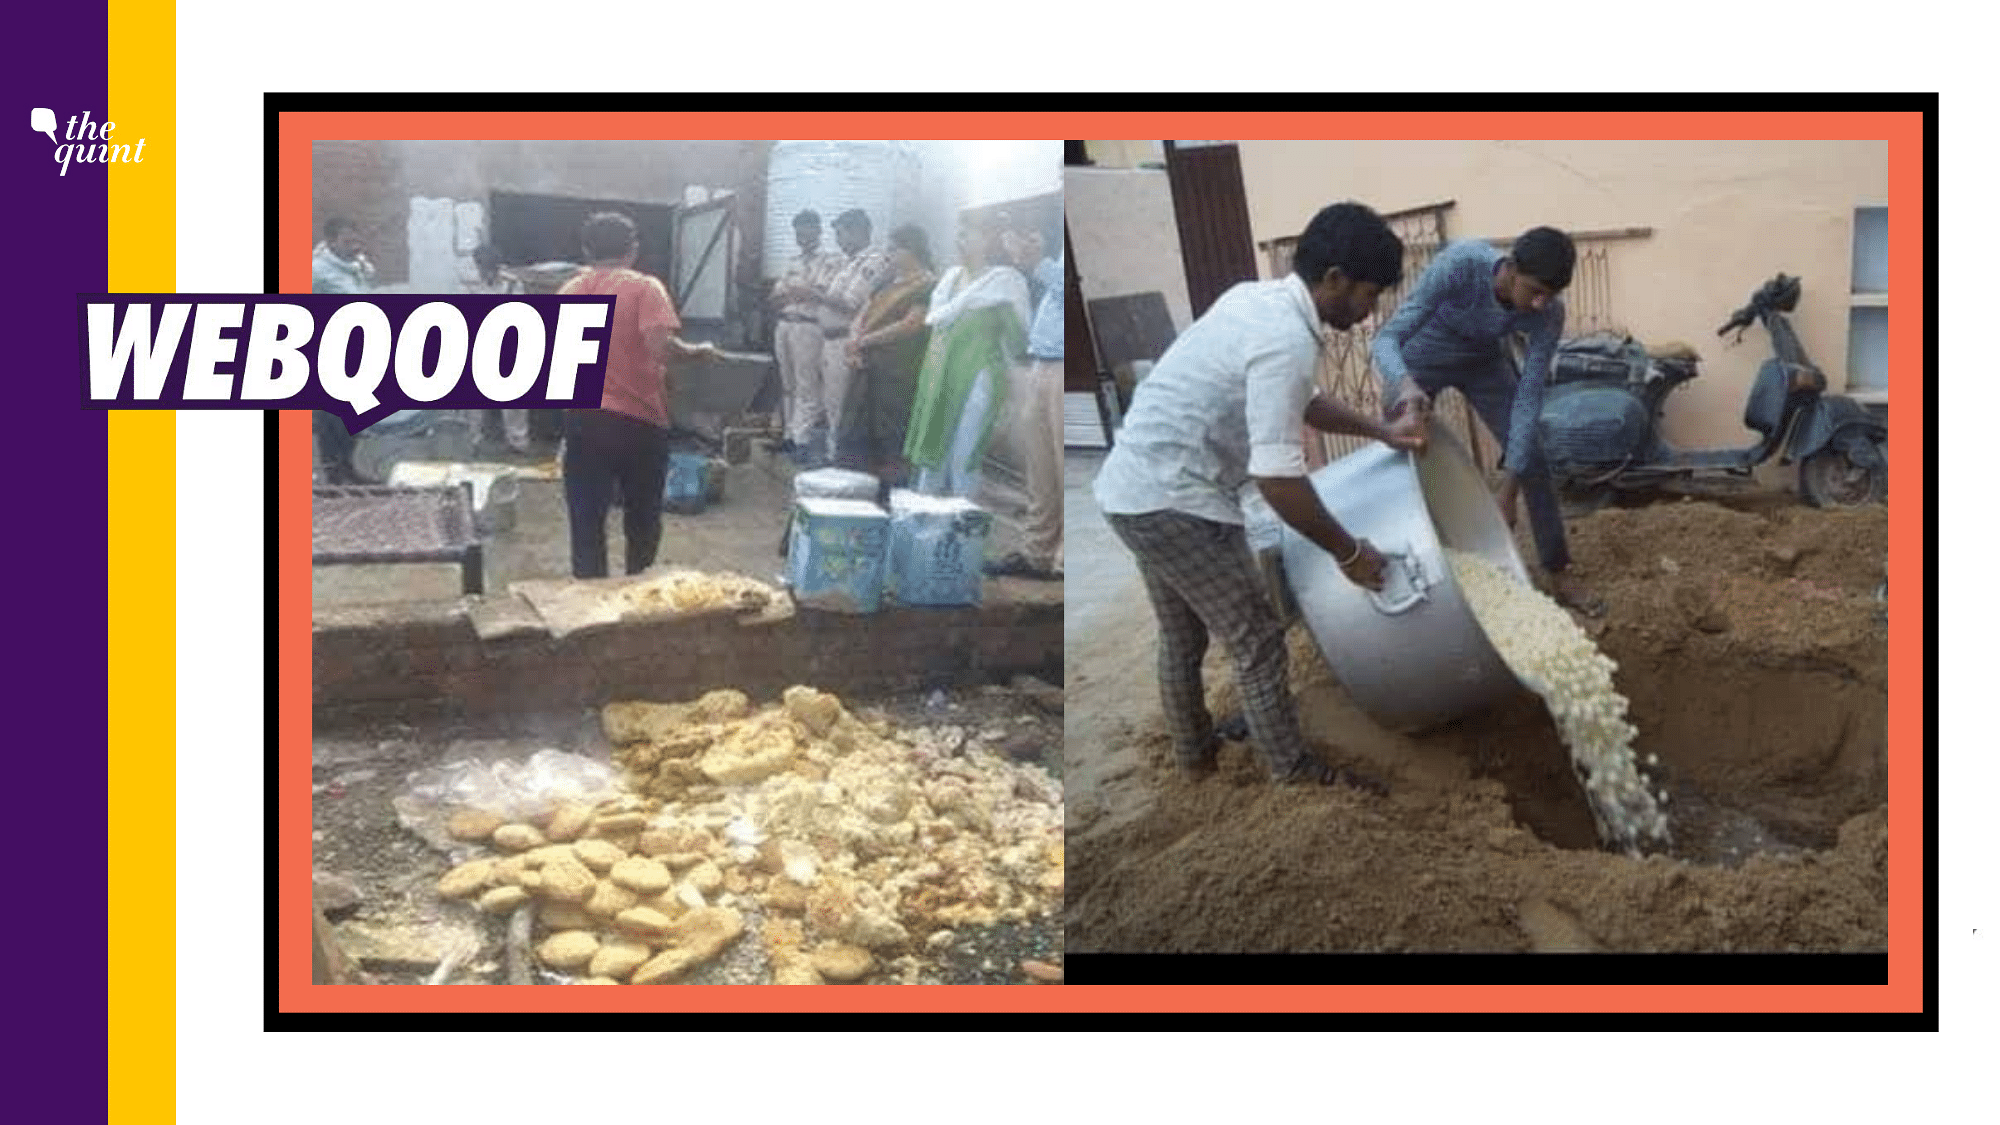 A set of unrelated images of sweets being dumped has been falsely shared as RJD workers disposing off rasgullas after losing the Bihar elections.